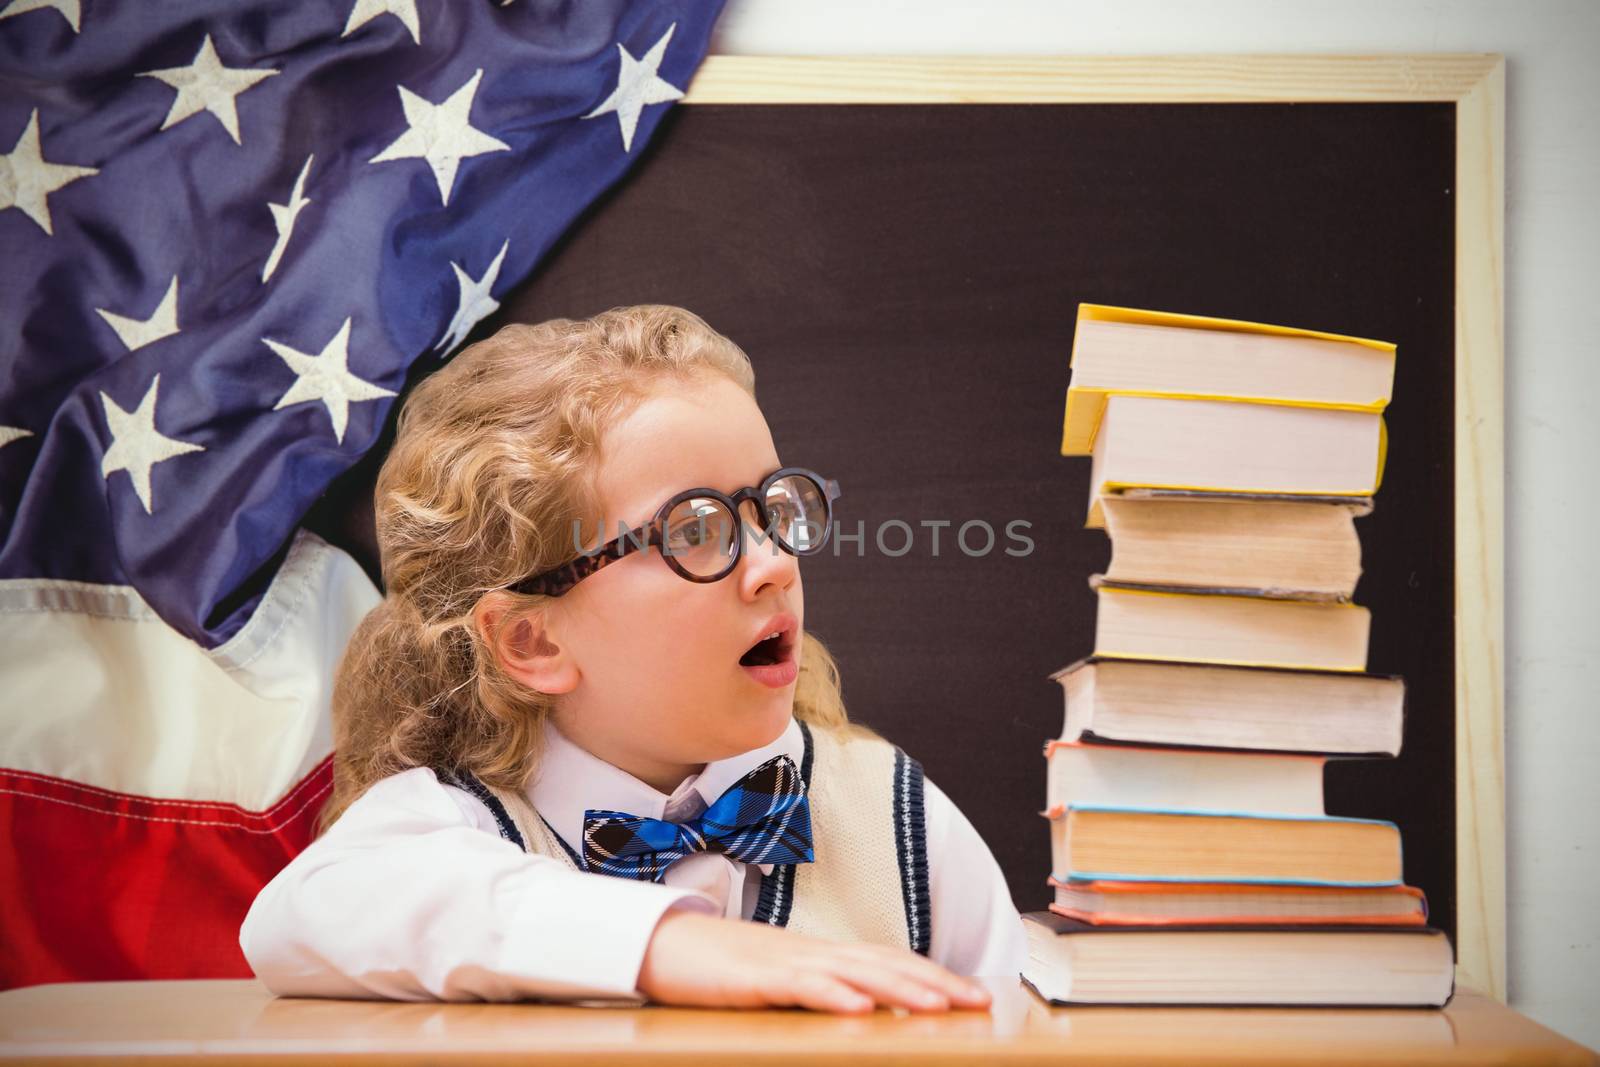 Composite image of surprise pupil looking at books by Wavebreakmedia